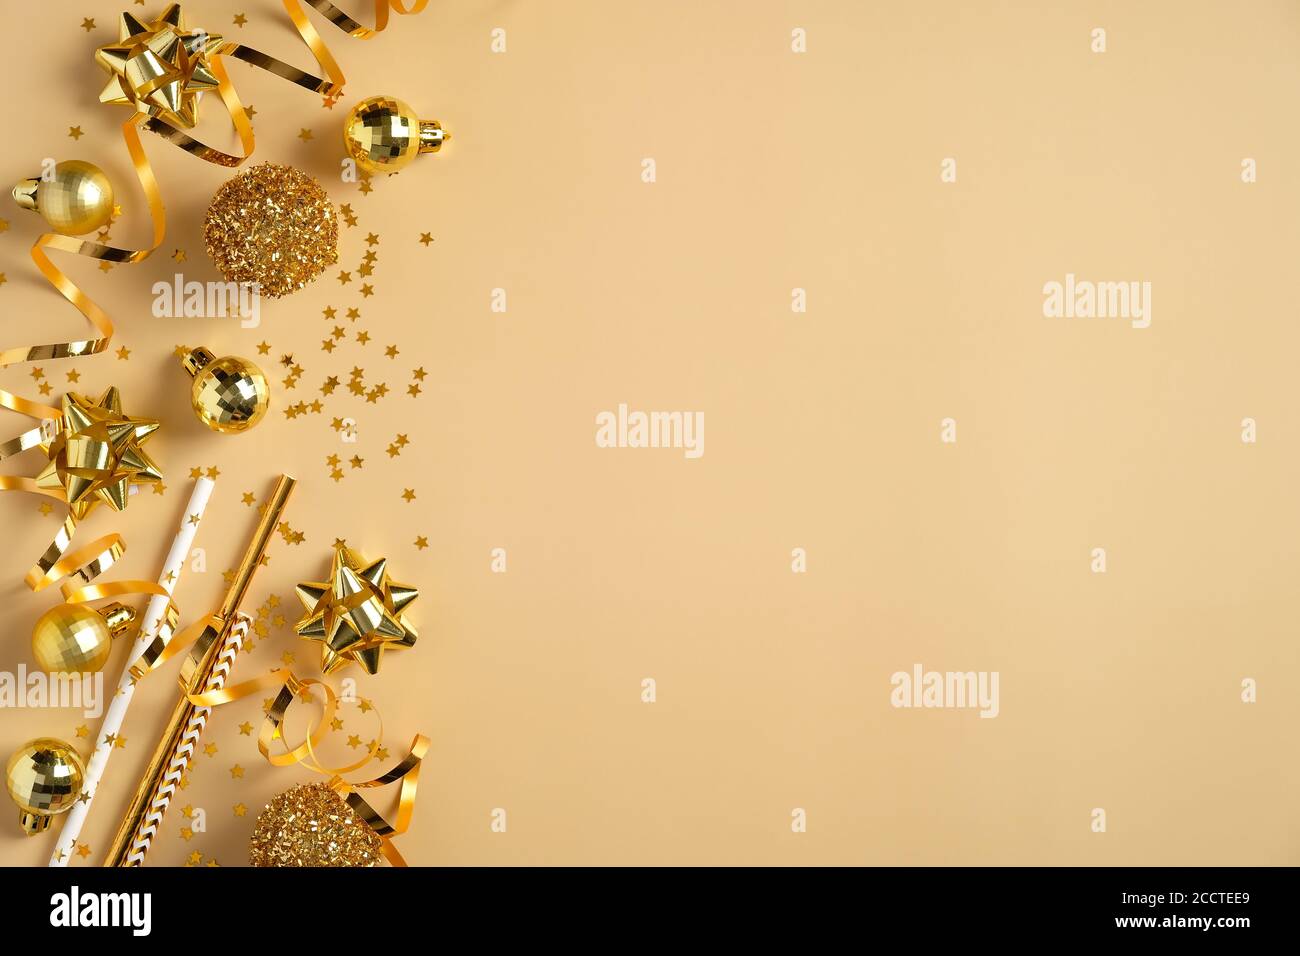 Christmas party invitation card mockup. Flat lay golden Christmas balls,  decorations, tinsel, confetti on yellow background. Top view with copy  space Stock Photo - Alamy